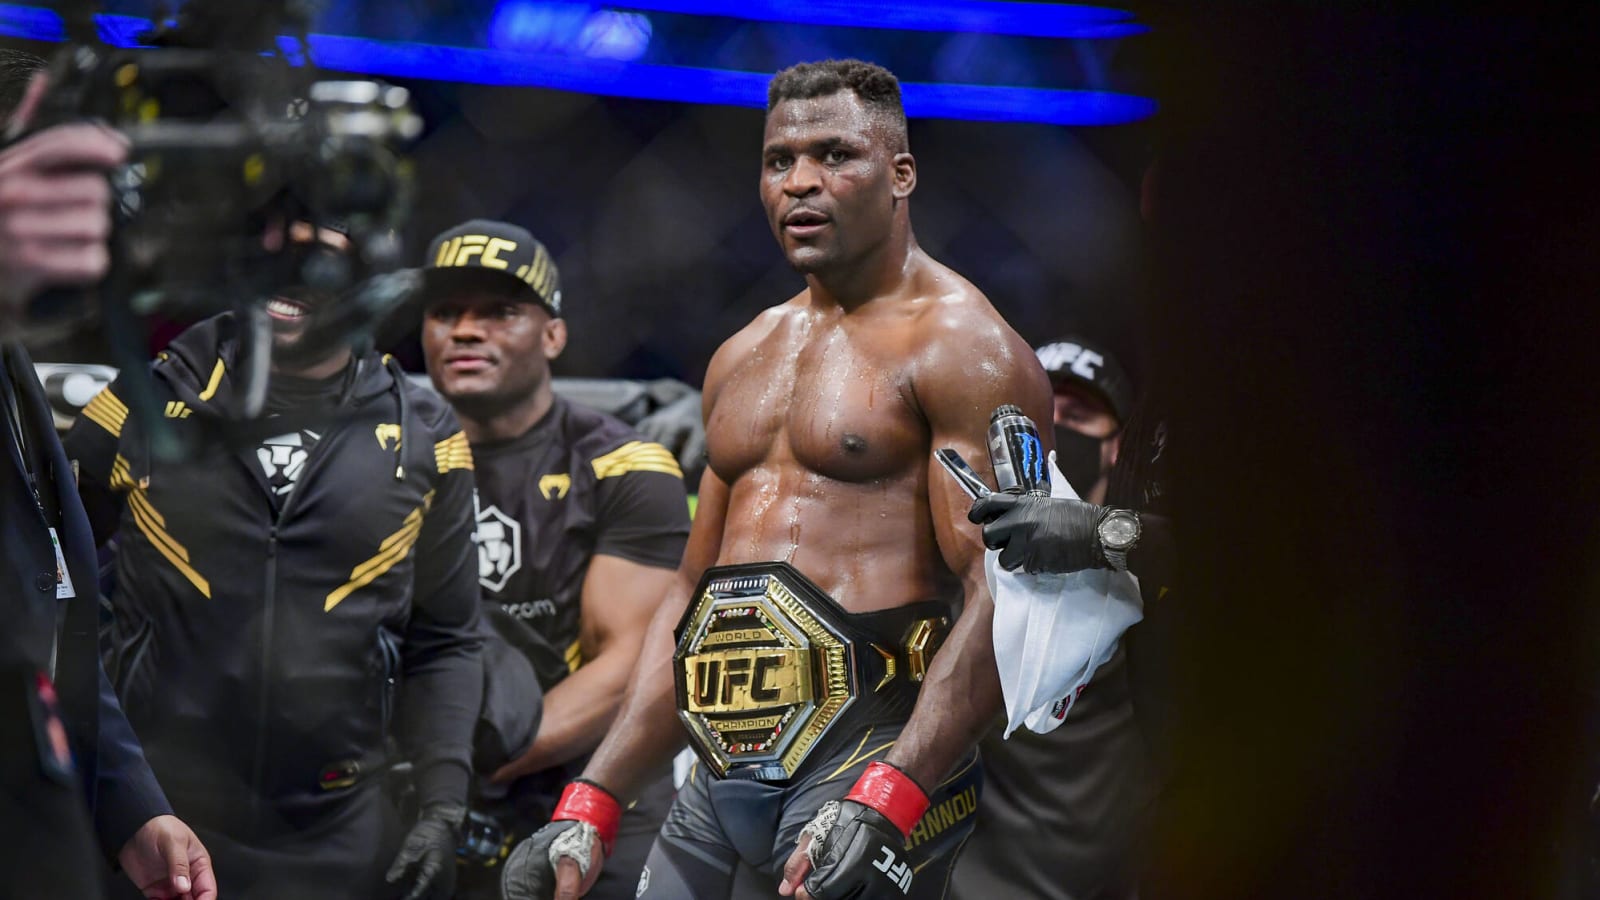 When Will Francis Ngannou Fight Again?